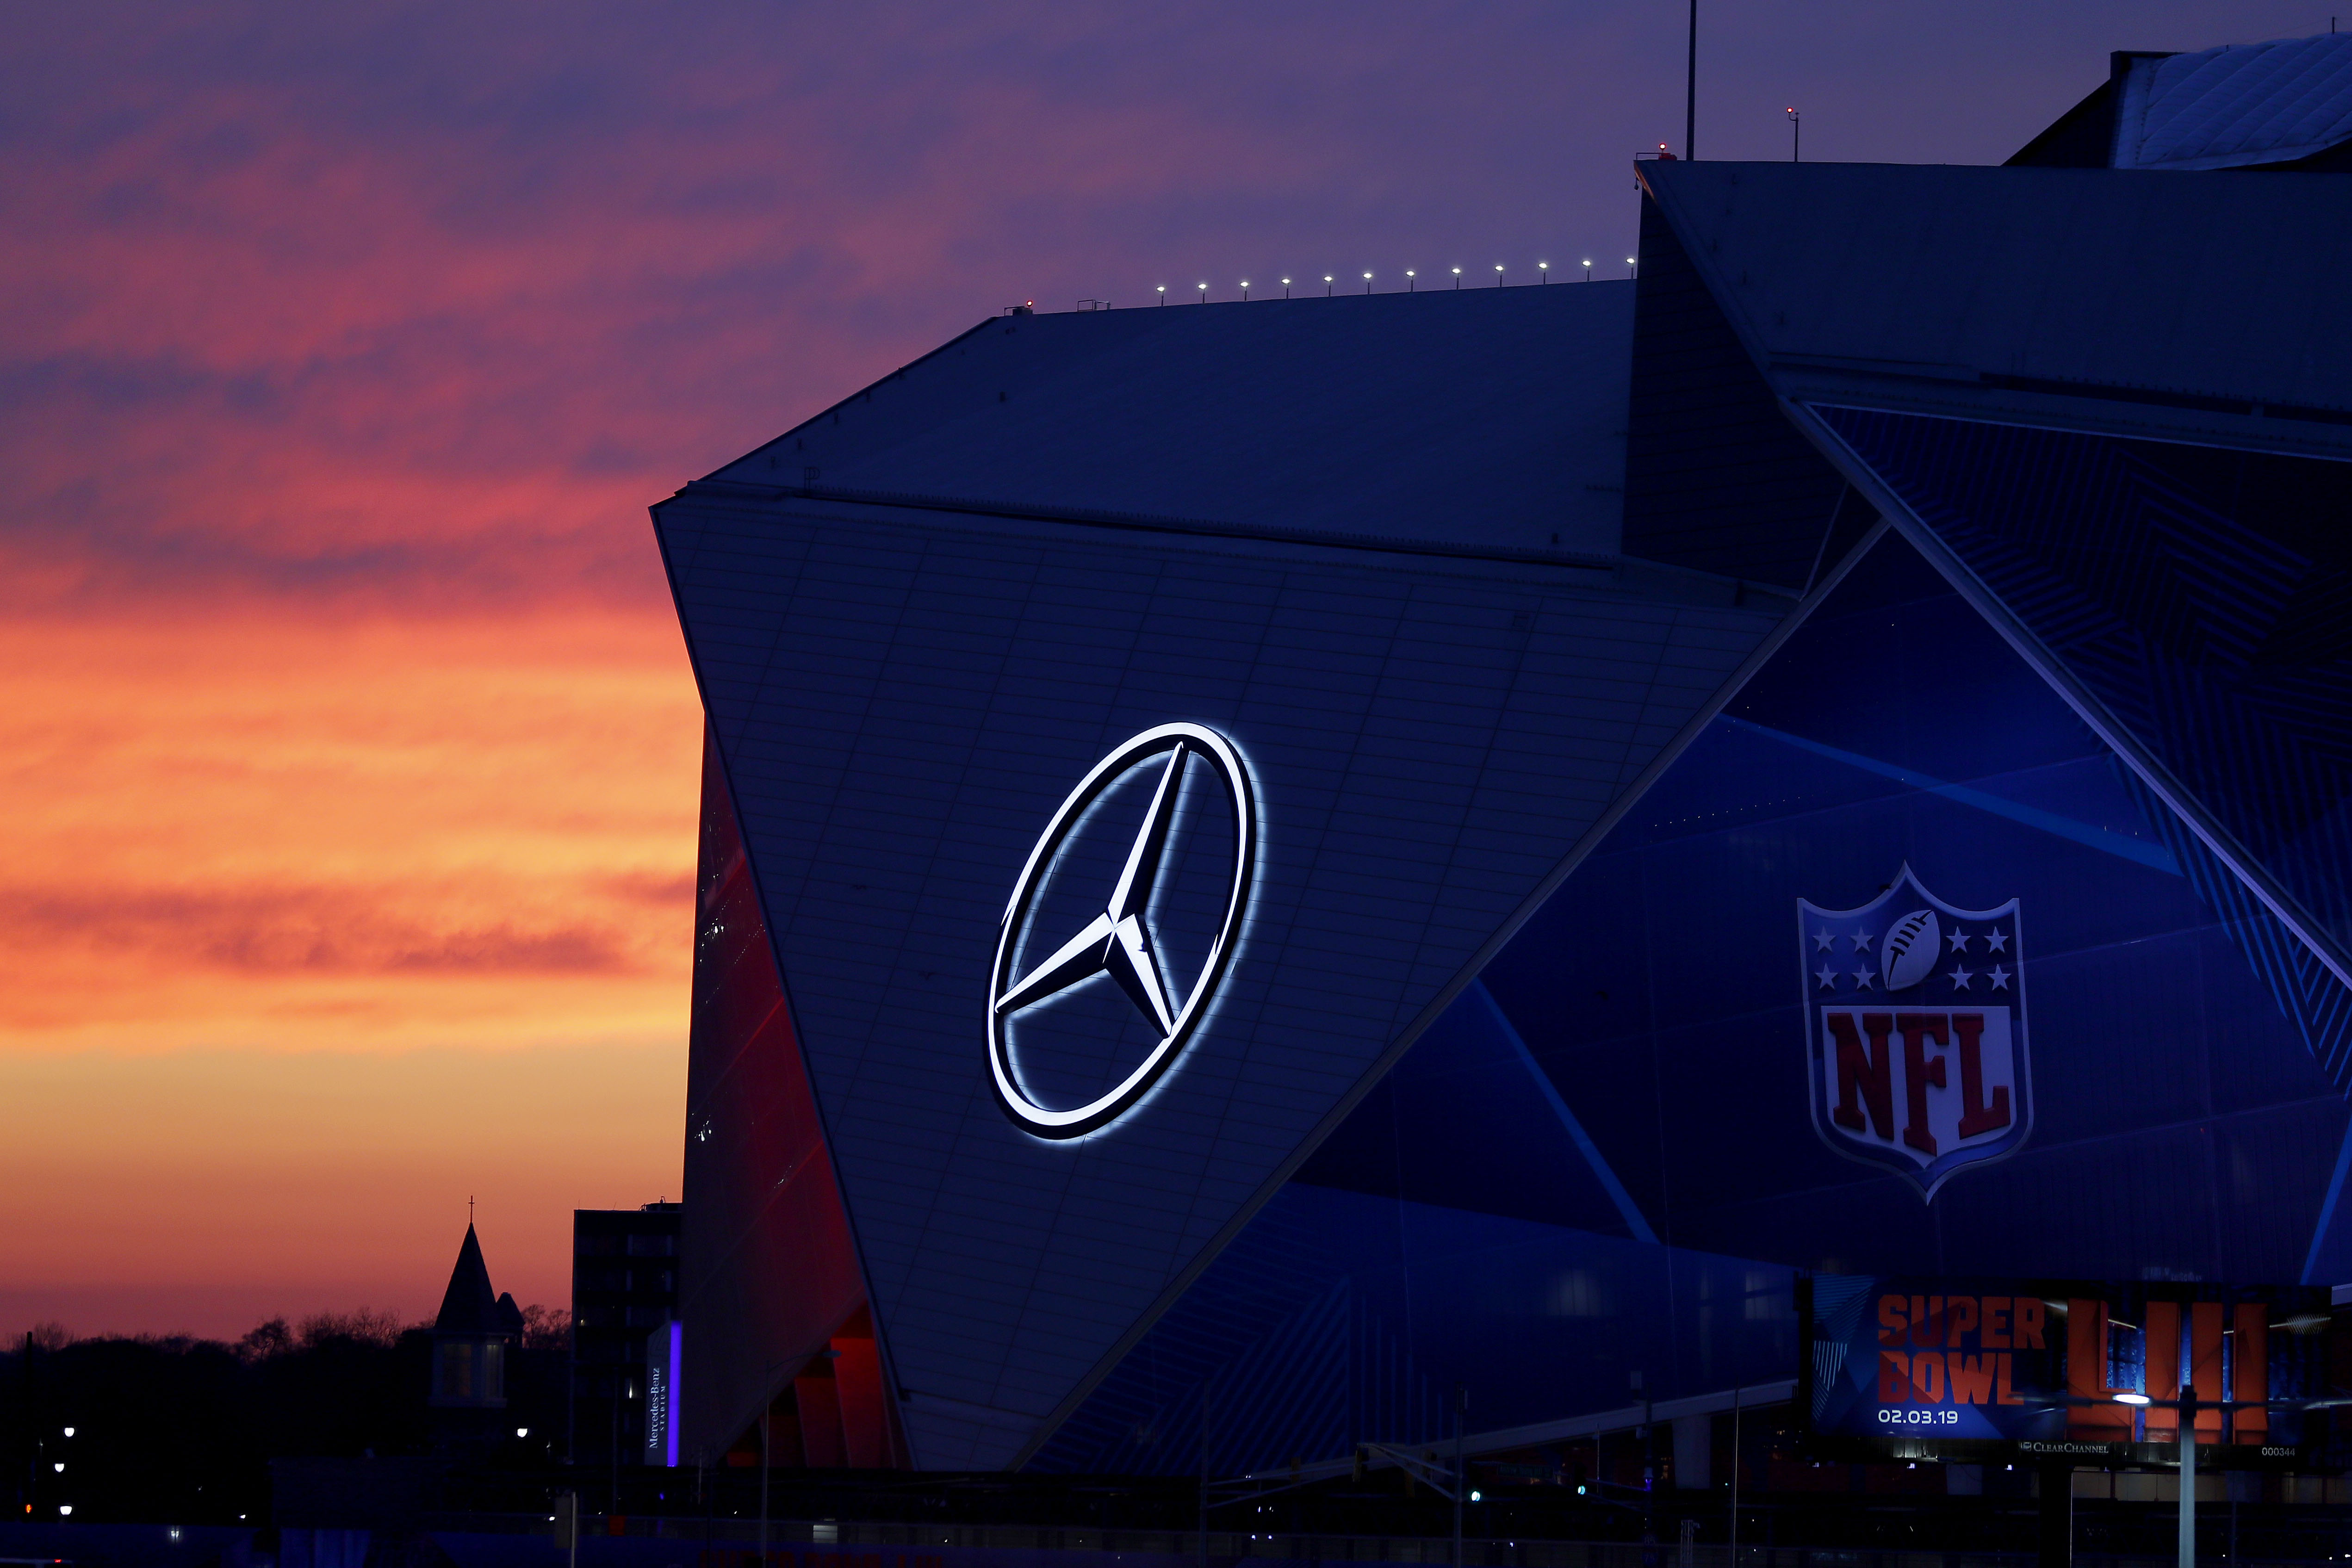 The Mercedes-Benz Stadium in Atlanta, Georgia, where the Super Bowl will be played on Sunday.